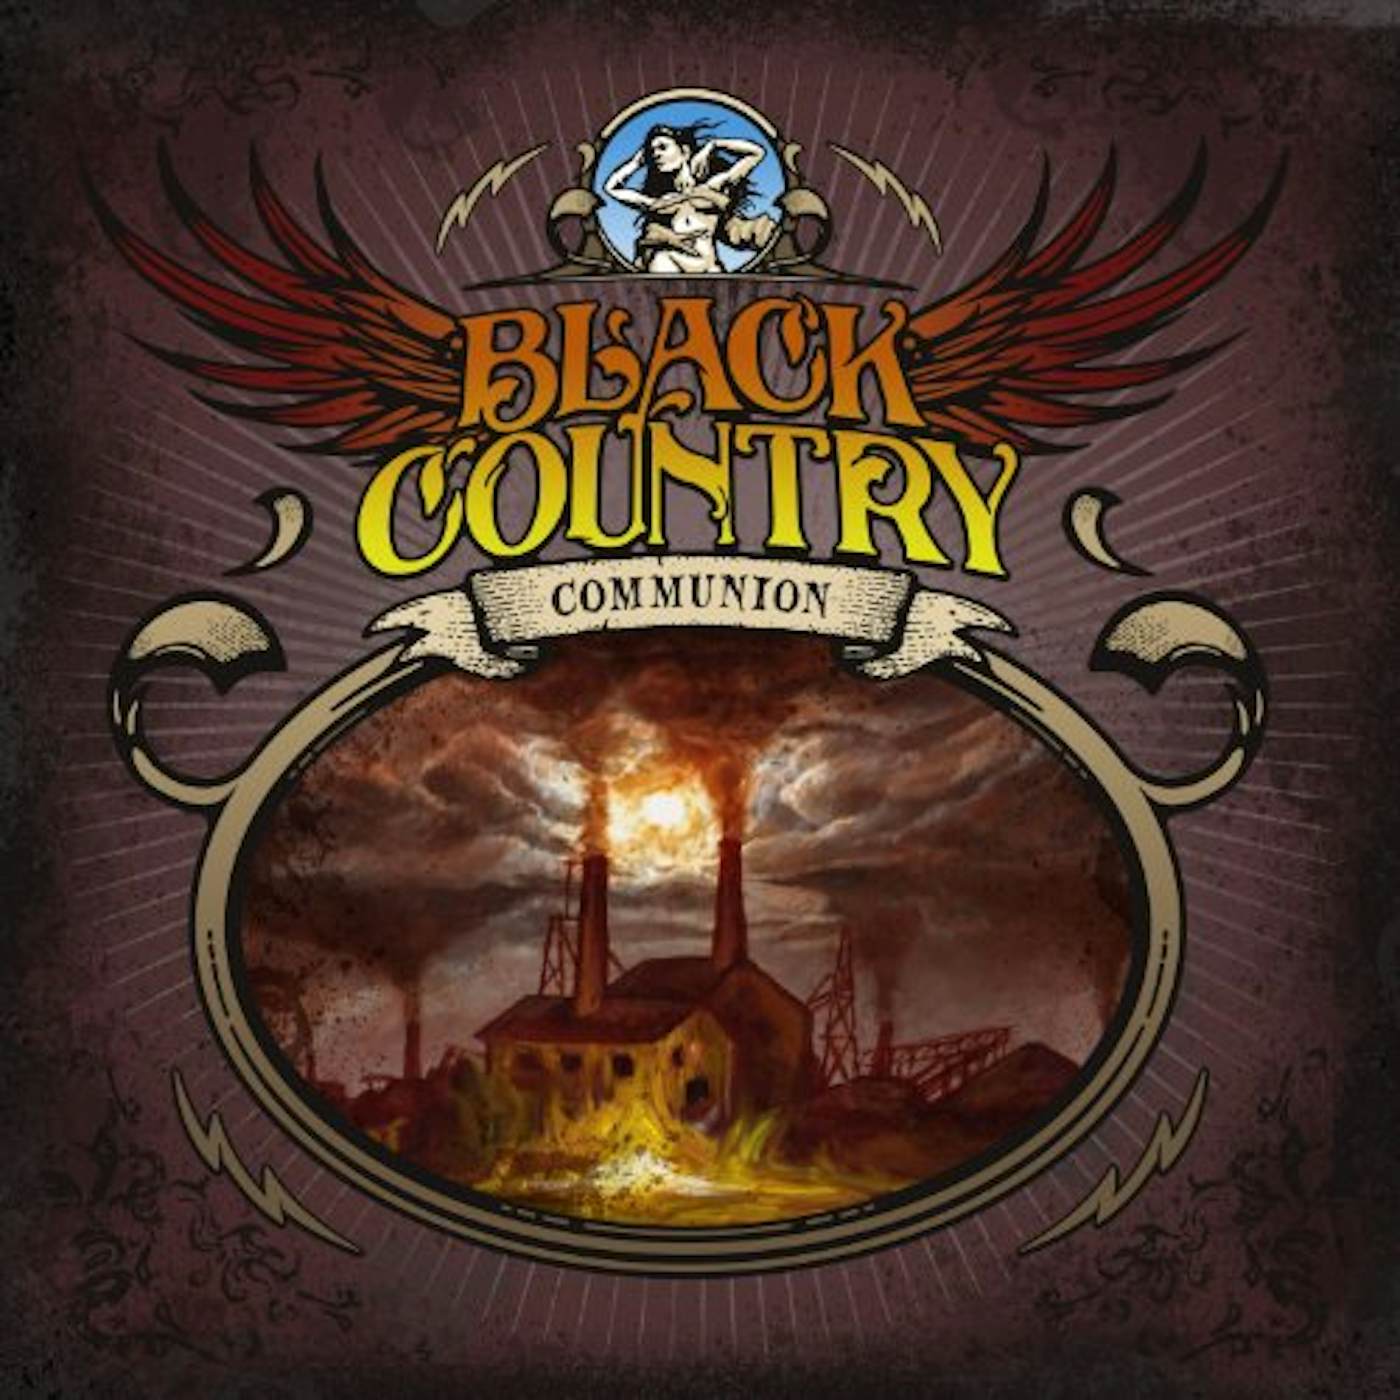 Black Country Communion BLACK COUNTRY CD